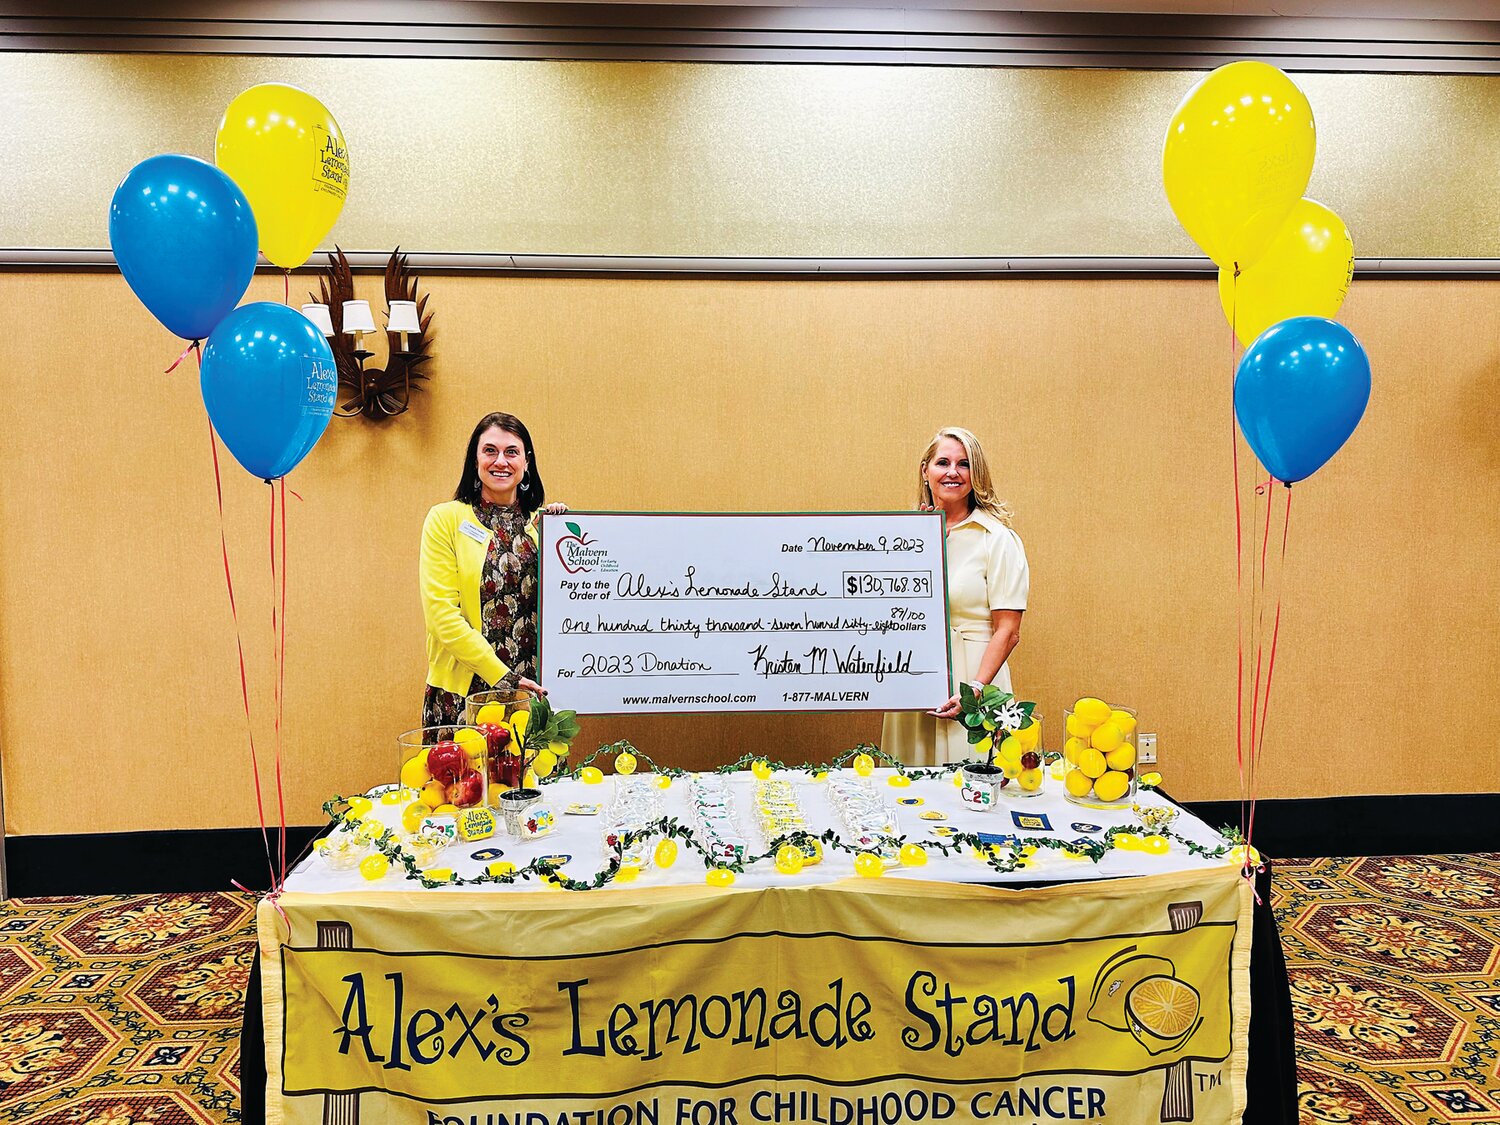 Senior Community Engagement Manager Christie Fischer, left, accepts a check on behalf of Alex’s Lemonade Stand Foundation presented by Kristen M. Waterfield, right, founder and president of The Malvern School.